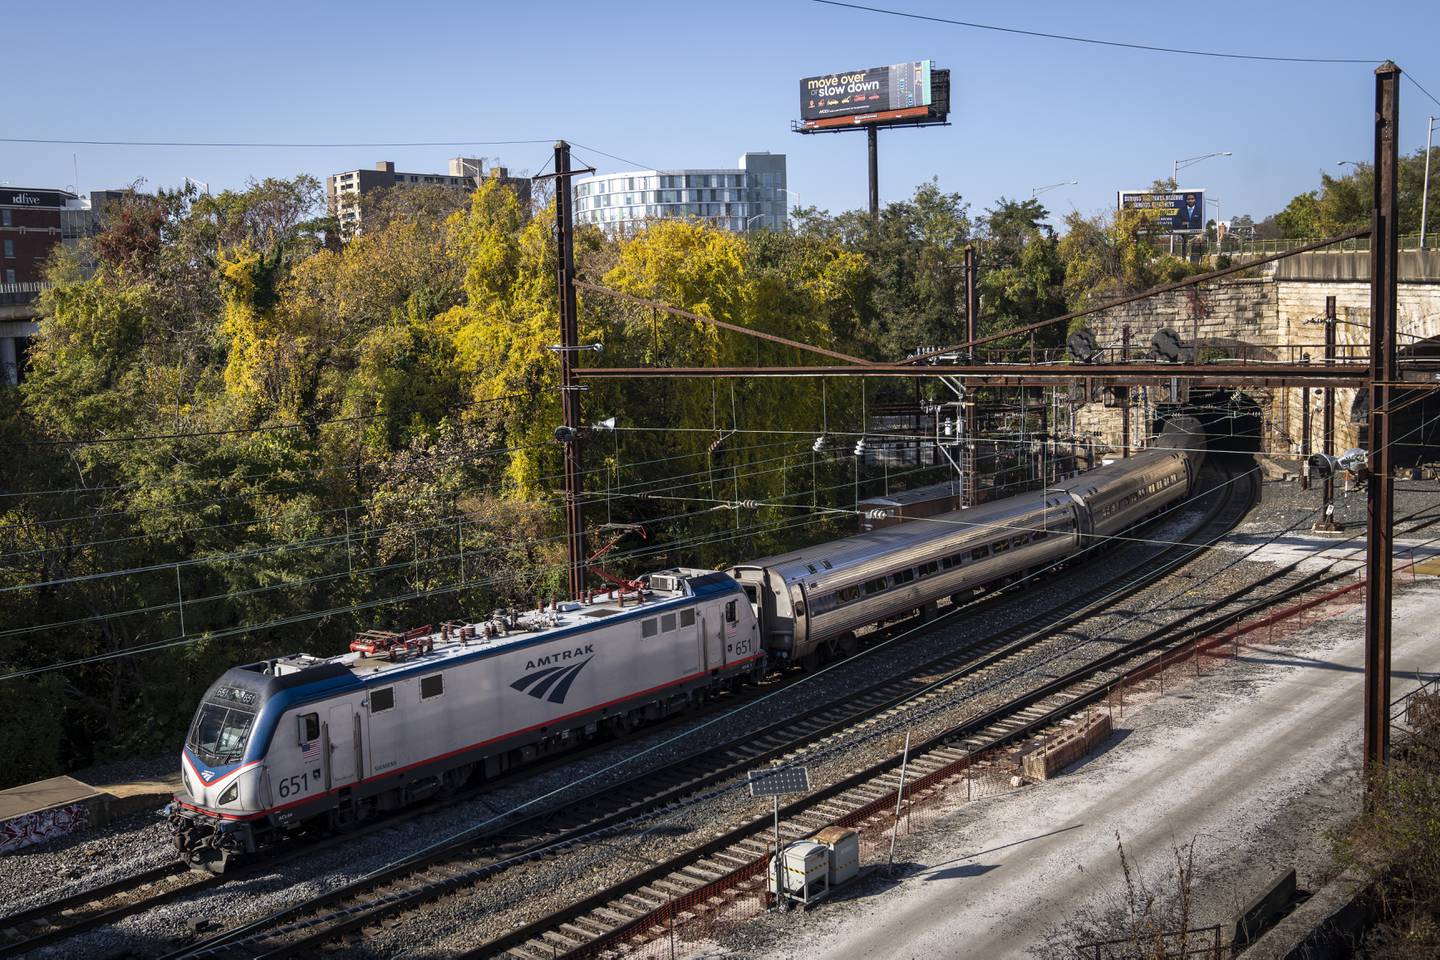 A silver and blue Amtrak train emerges from a tunnel. In the background trees and a small piece of the Baltimore skyline are visible.